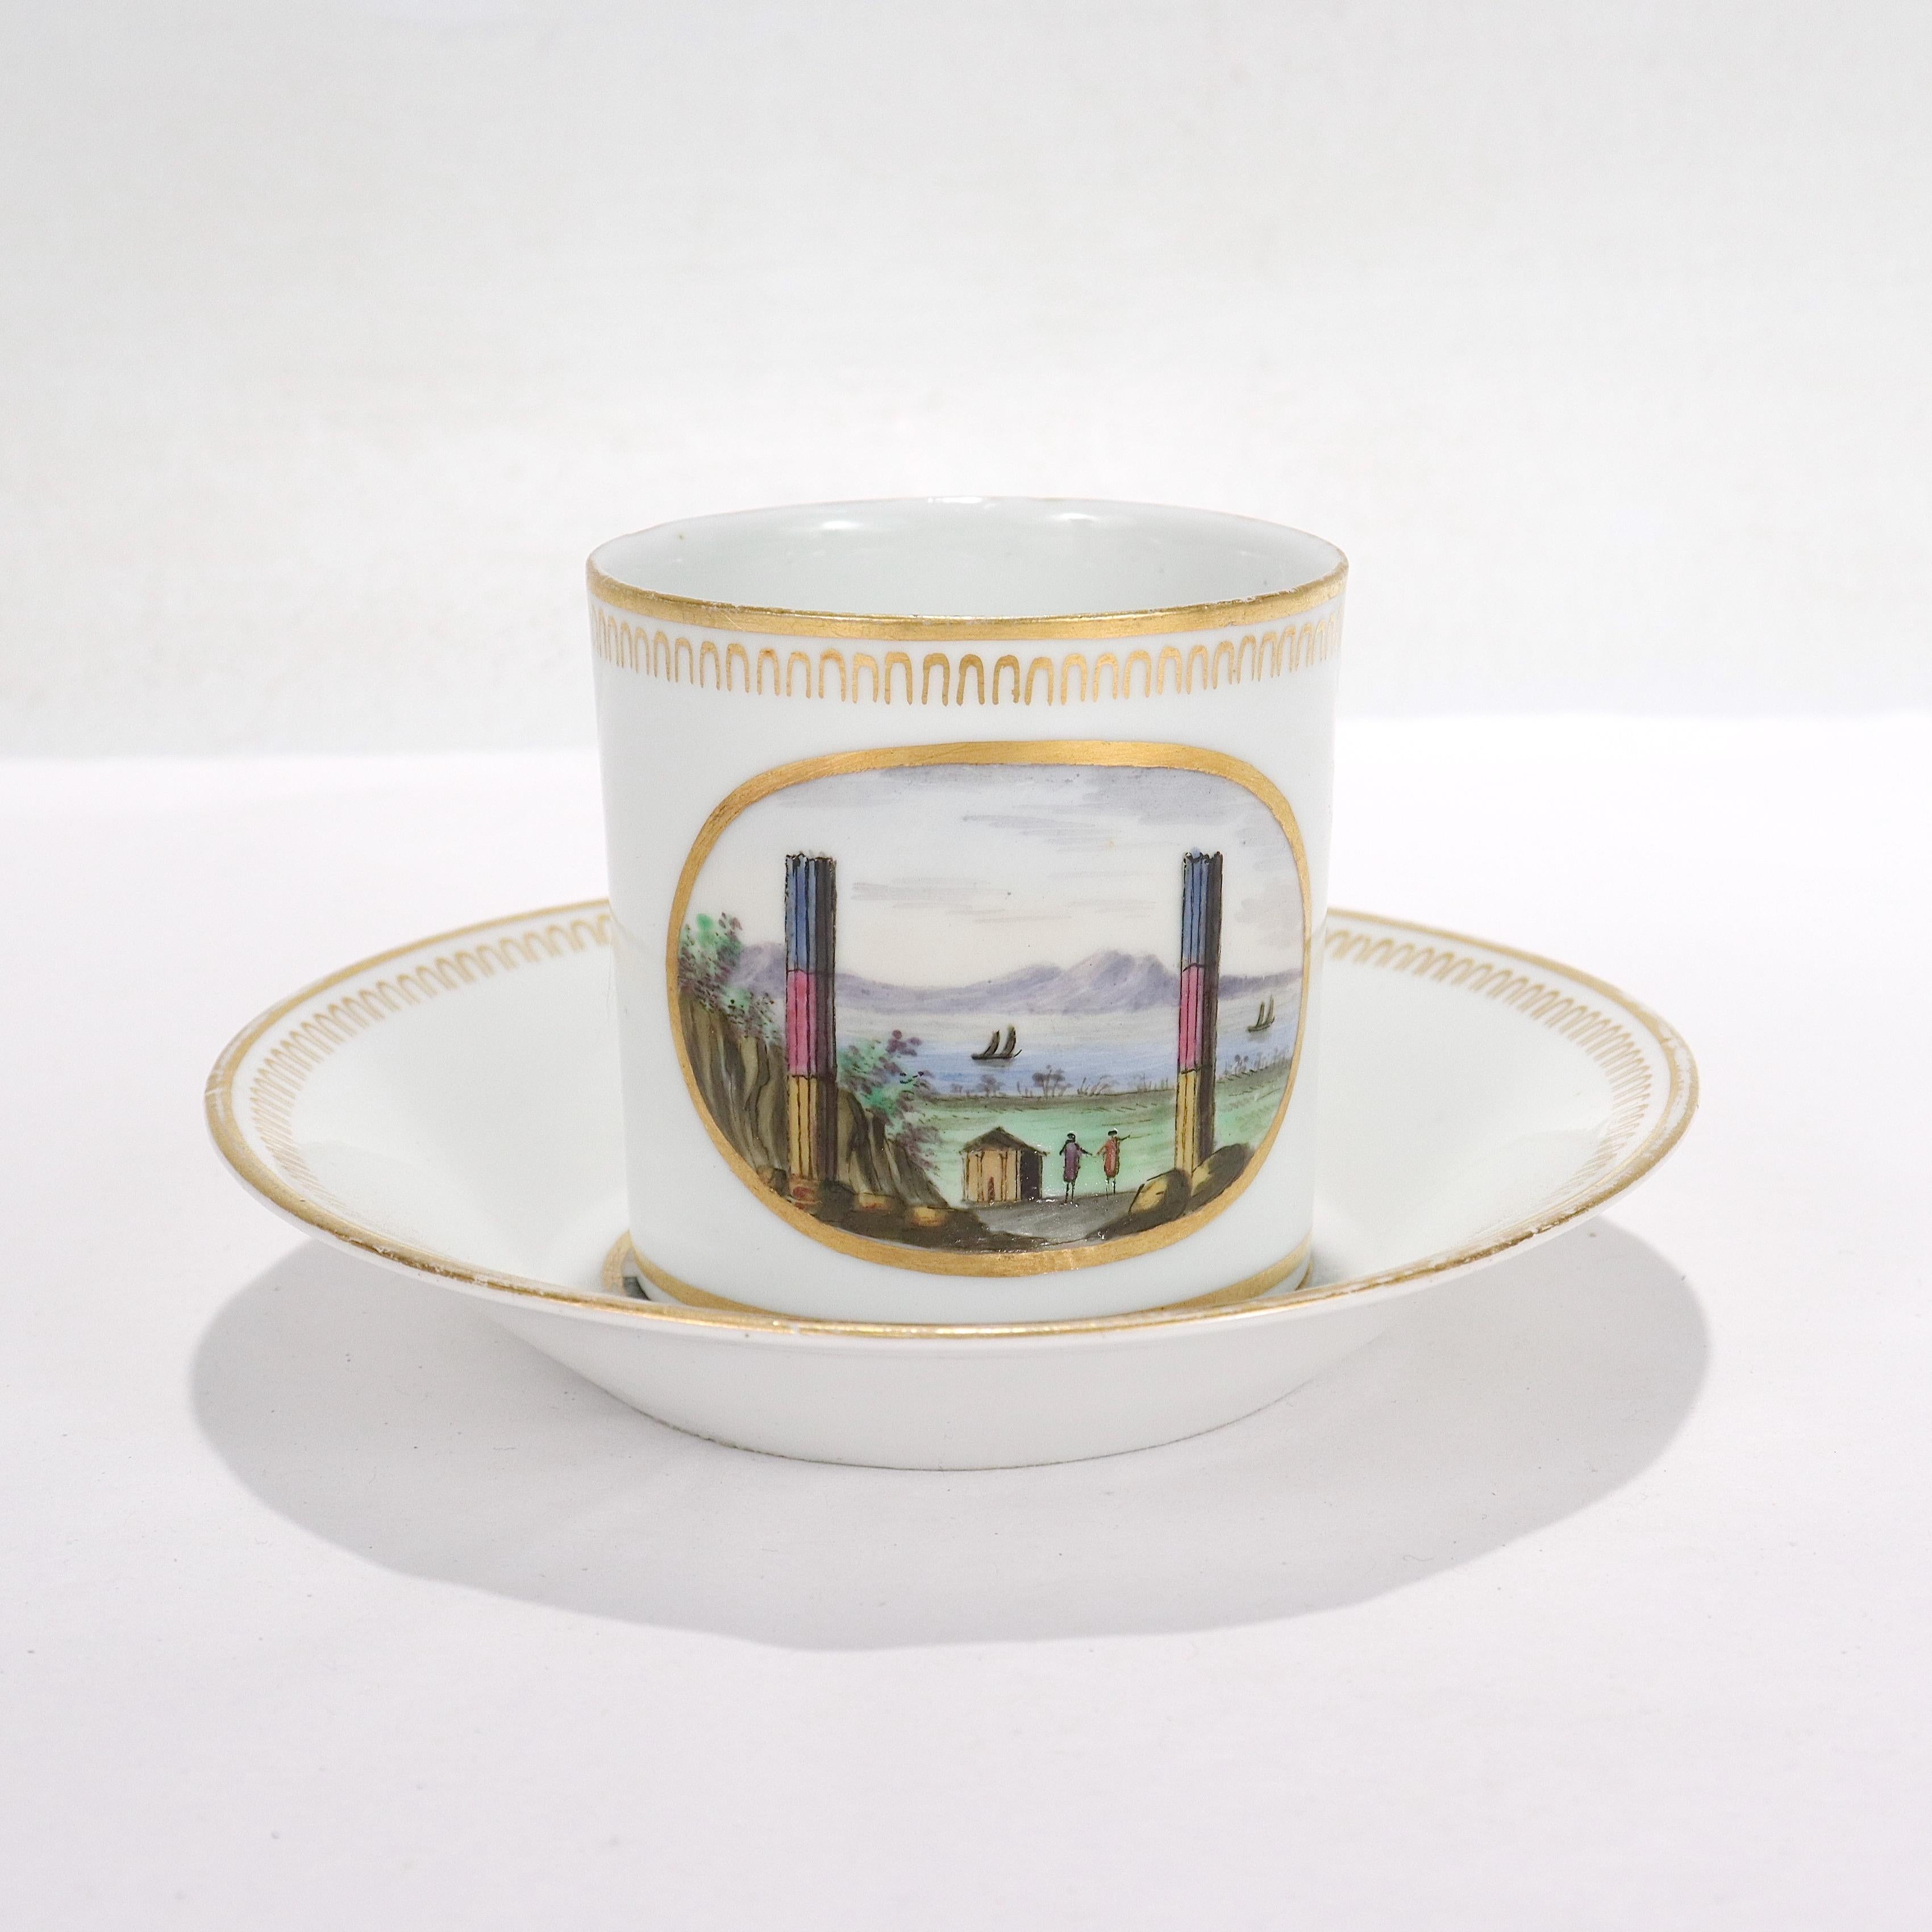 A very fine antique Italian Doccia Topographical porcelain neoclassical cup & saucer.

By Doccia Porcelain Manufactory circa 1820.

With painted enamel topographical scenes: the cup depicting 